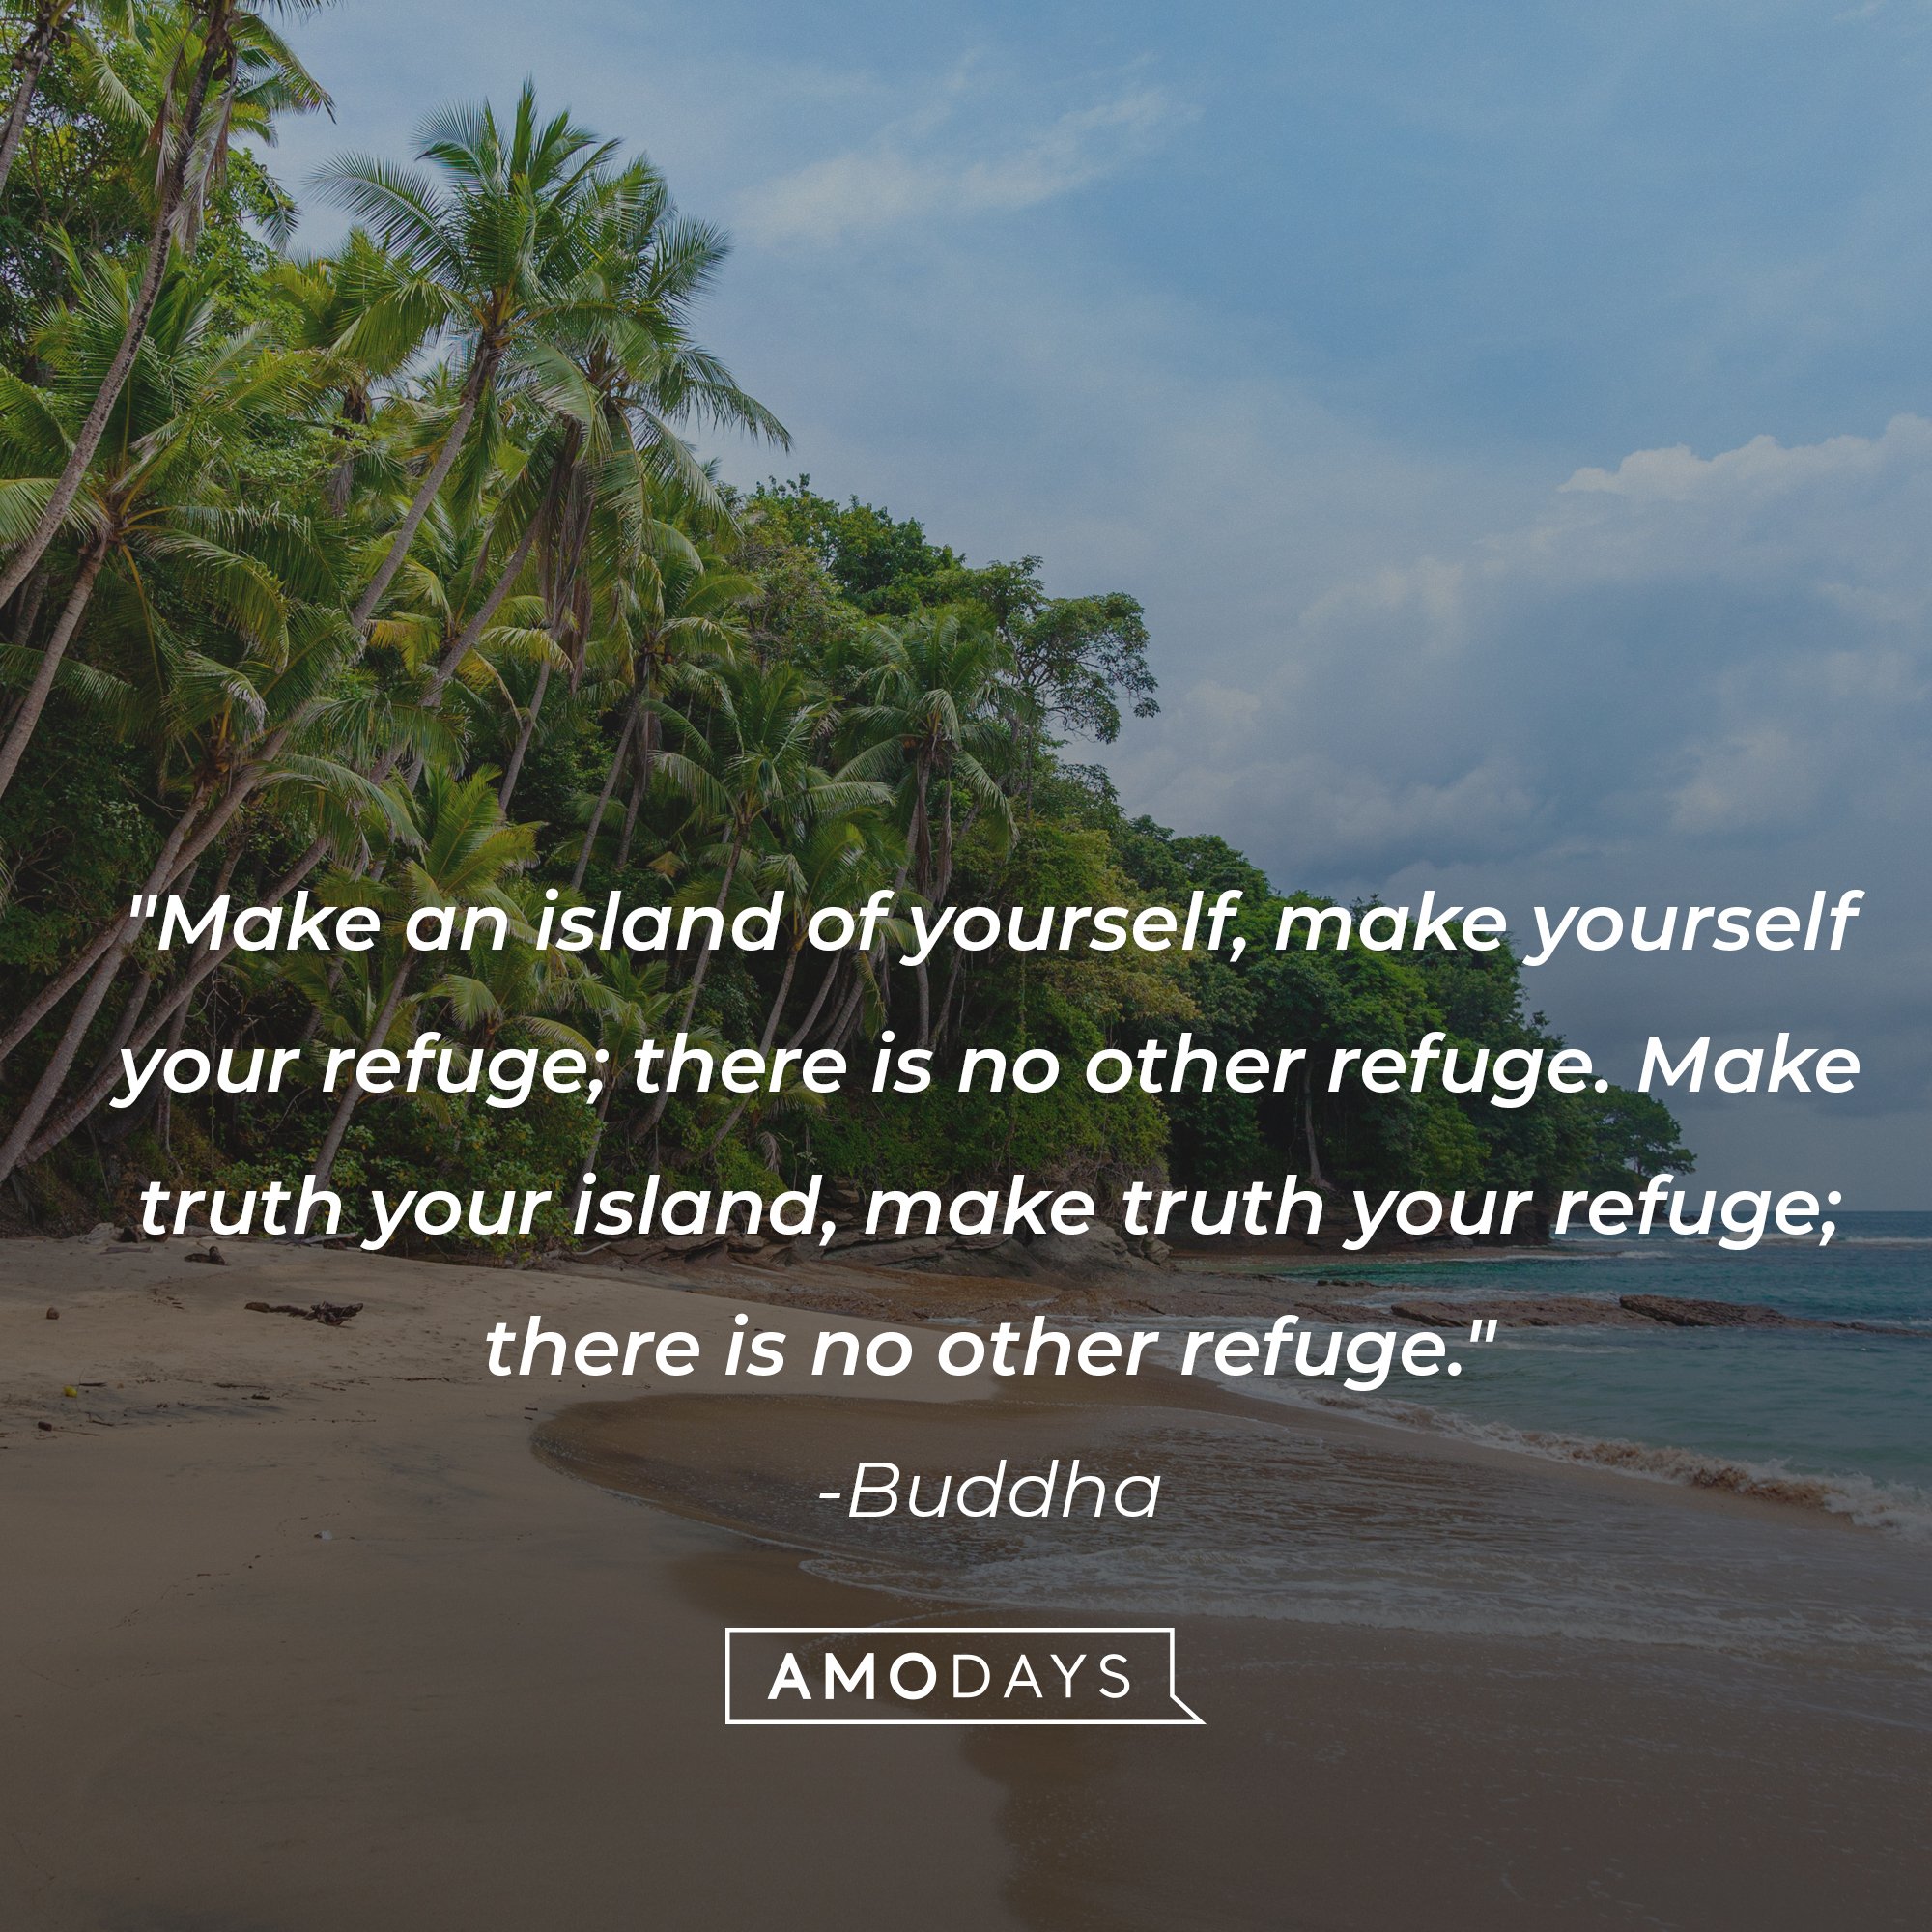 Buddha's quote: "Make an island of yourself, make yourself your refuge; there is no other refuge. Make truth your island, make truth your refuge; there is no other refuge." | Image: AmoDays